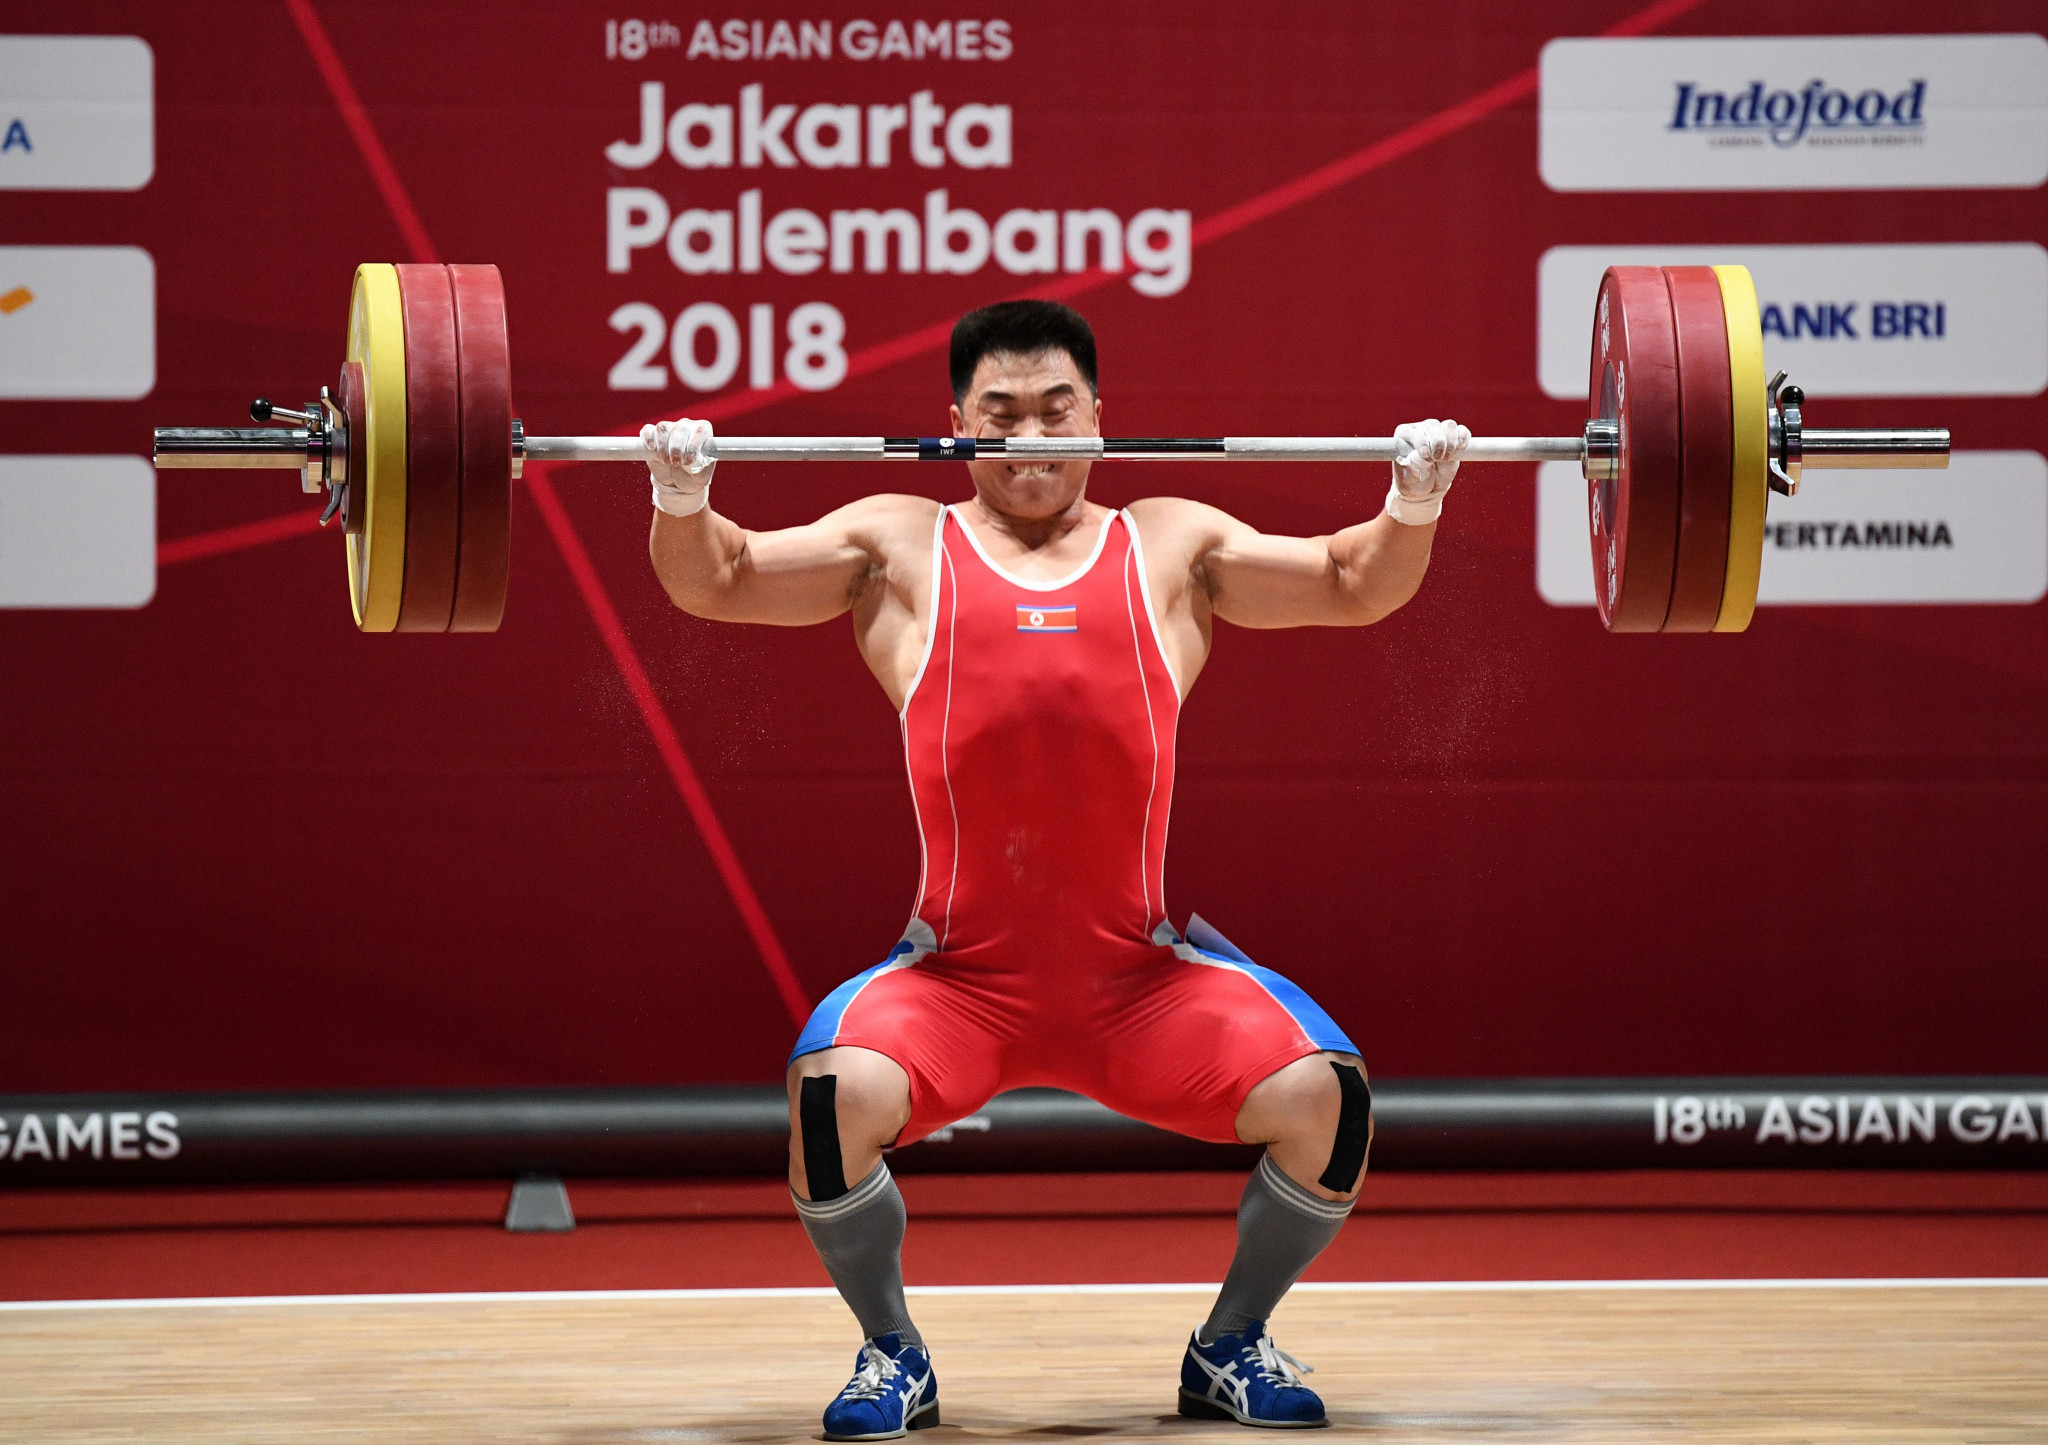 North Korea's Jon Wi Choe won gold in the men's 77kg weightlifting, in a final which saw more than one athlete injured ©Getty Images